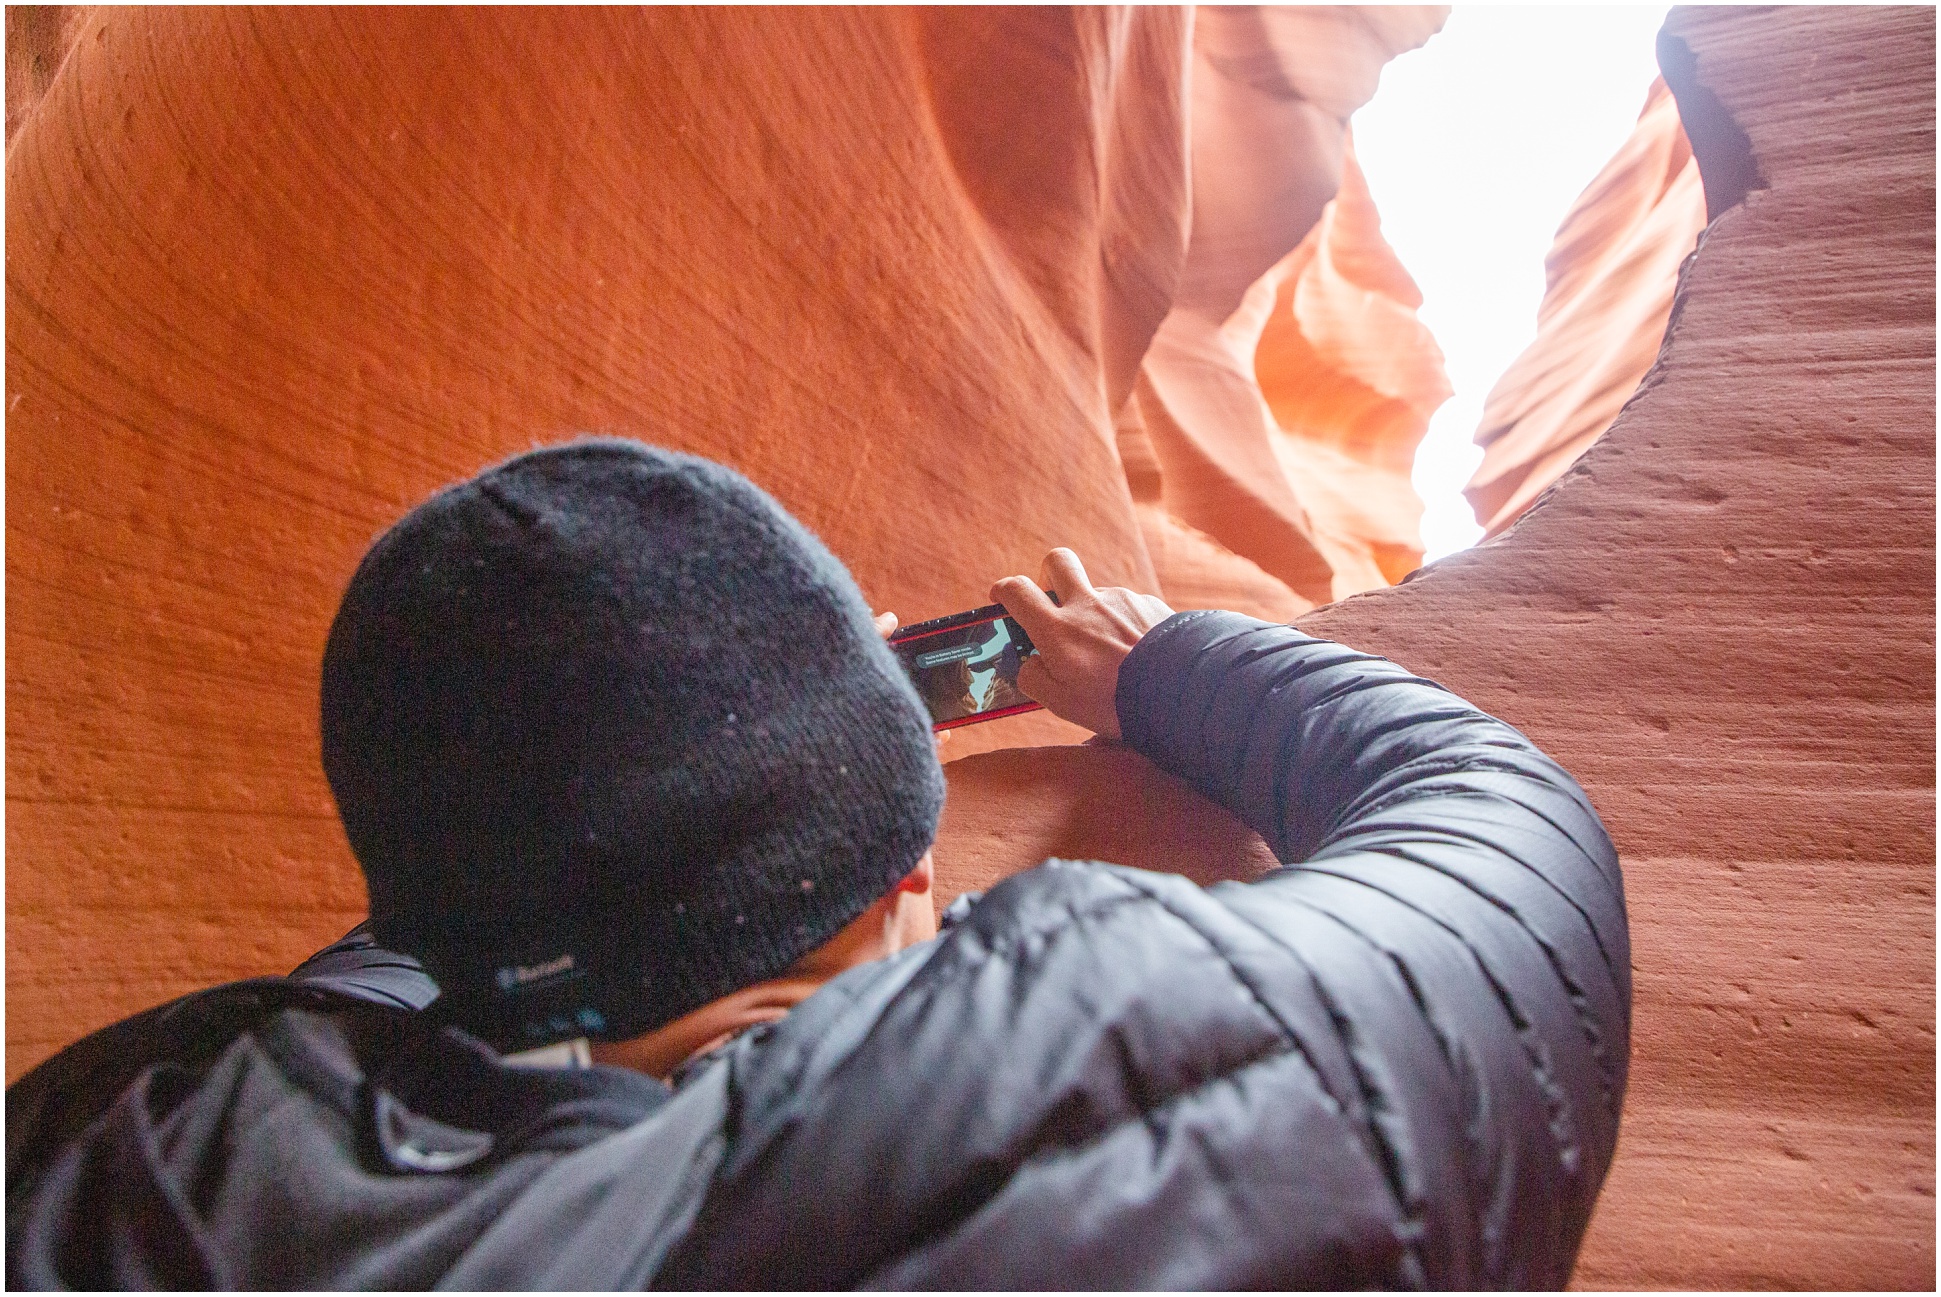 Michael taking a photo of the Antelope Canyon